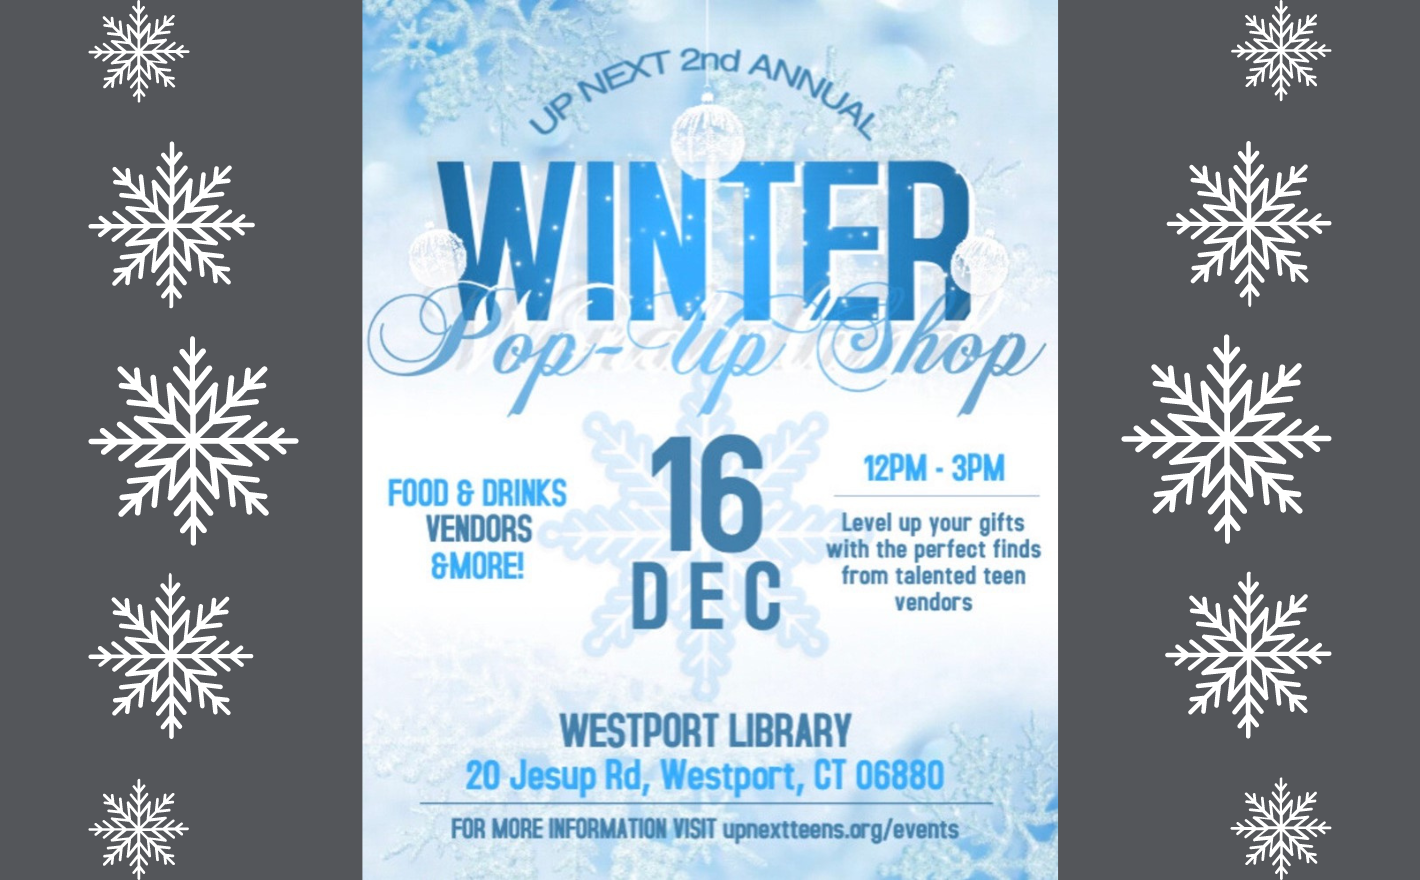 Up|Next 2nd Annual Winter Pop-Up Shop. Food & drinks, vendors, & more! December 16th, 12om-3pm. Level up your gifts with the perfect finds from talented teen vendors. Westport Library, 20 Jesup Road, Westport CT, 06880. For more information visit http://upnextteens.org/events